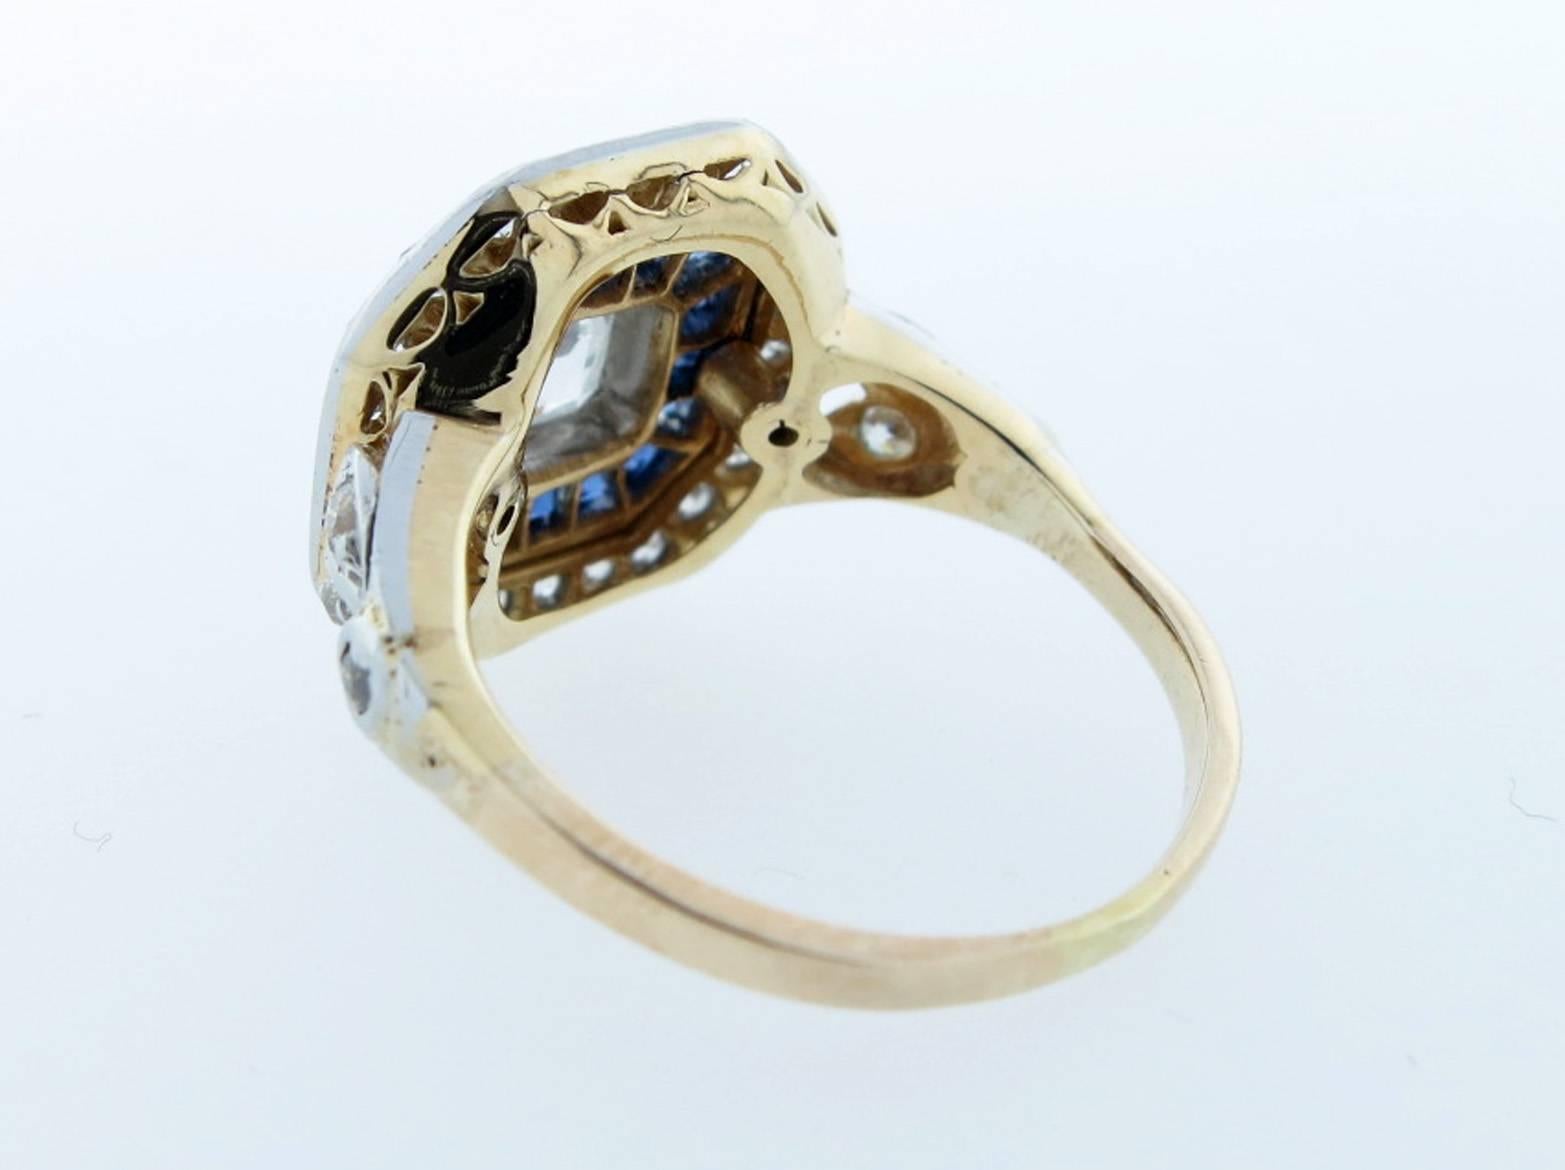 Stunning regal platinum top and 18kt. yellow gold ring. Bezel set with a center old Asscher cut diamond weighing approx .80cts. grading VS clarity H color  surrounded by 16 tapered faceted natural blue sapphires. The frame is bead set with 30 old